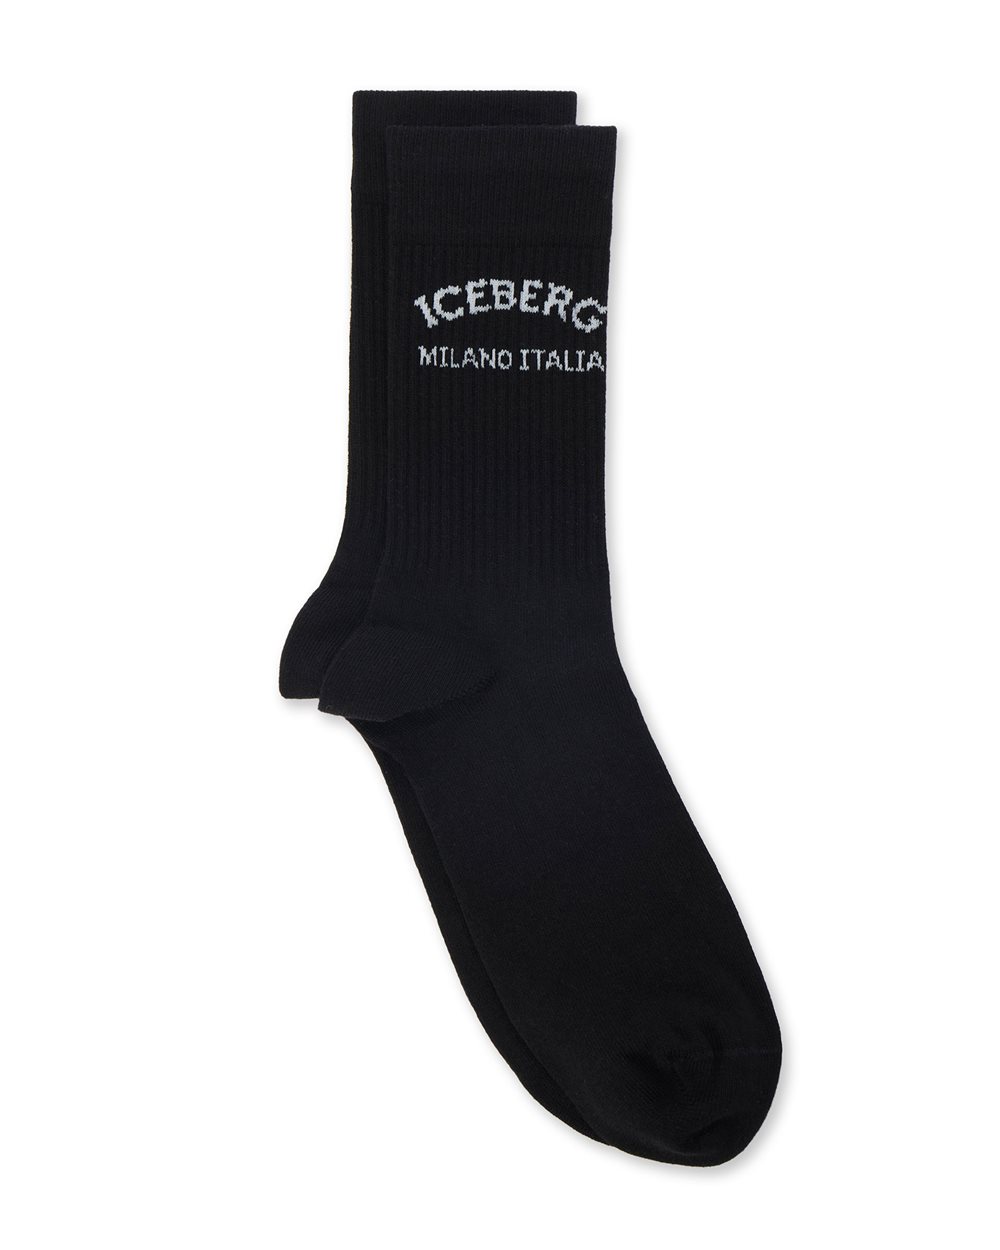 Cotton socks with logo - carryover fw24 | Iceberg - Official Website